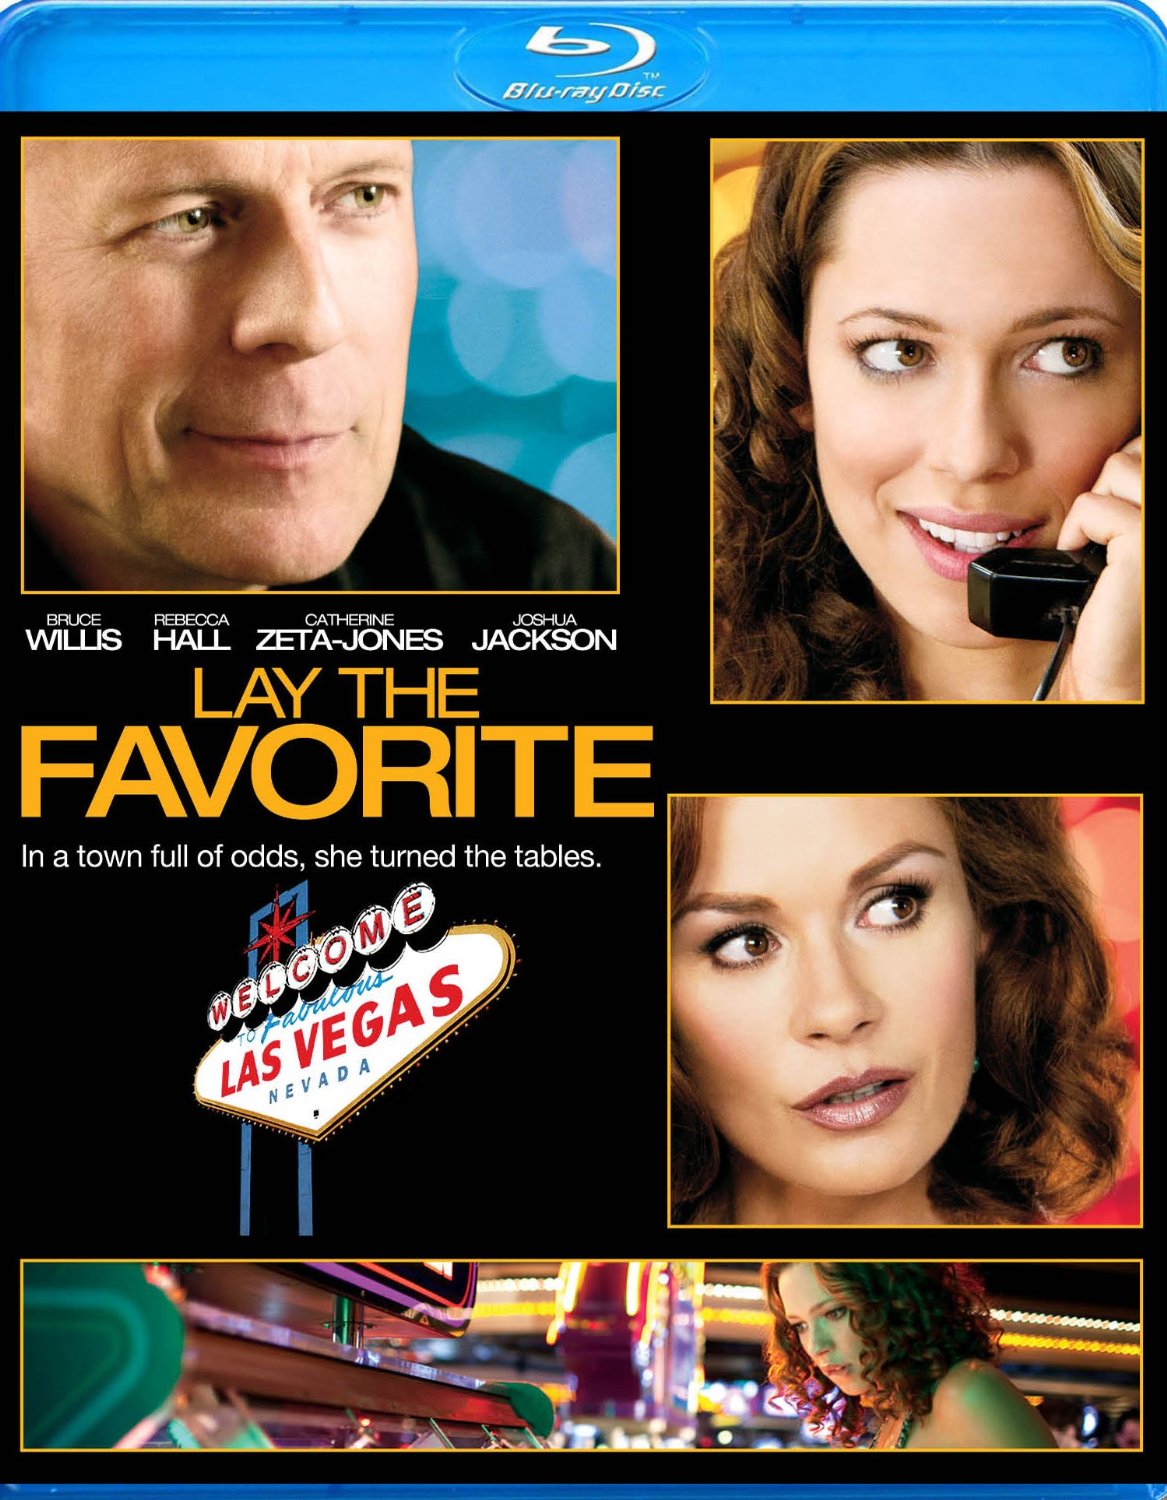 DVD Reviews: Lay the Favorite